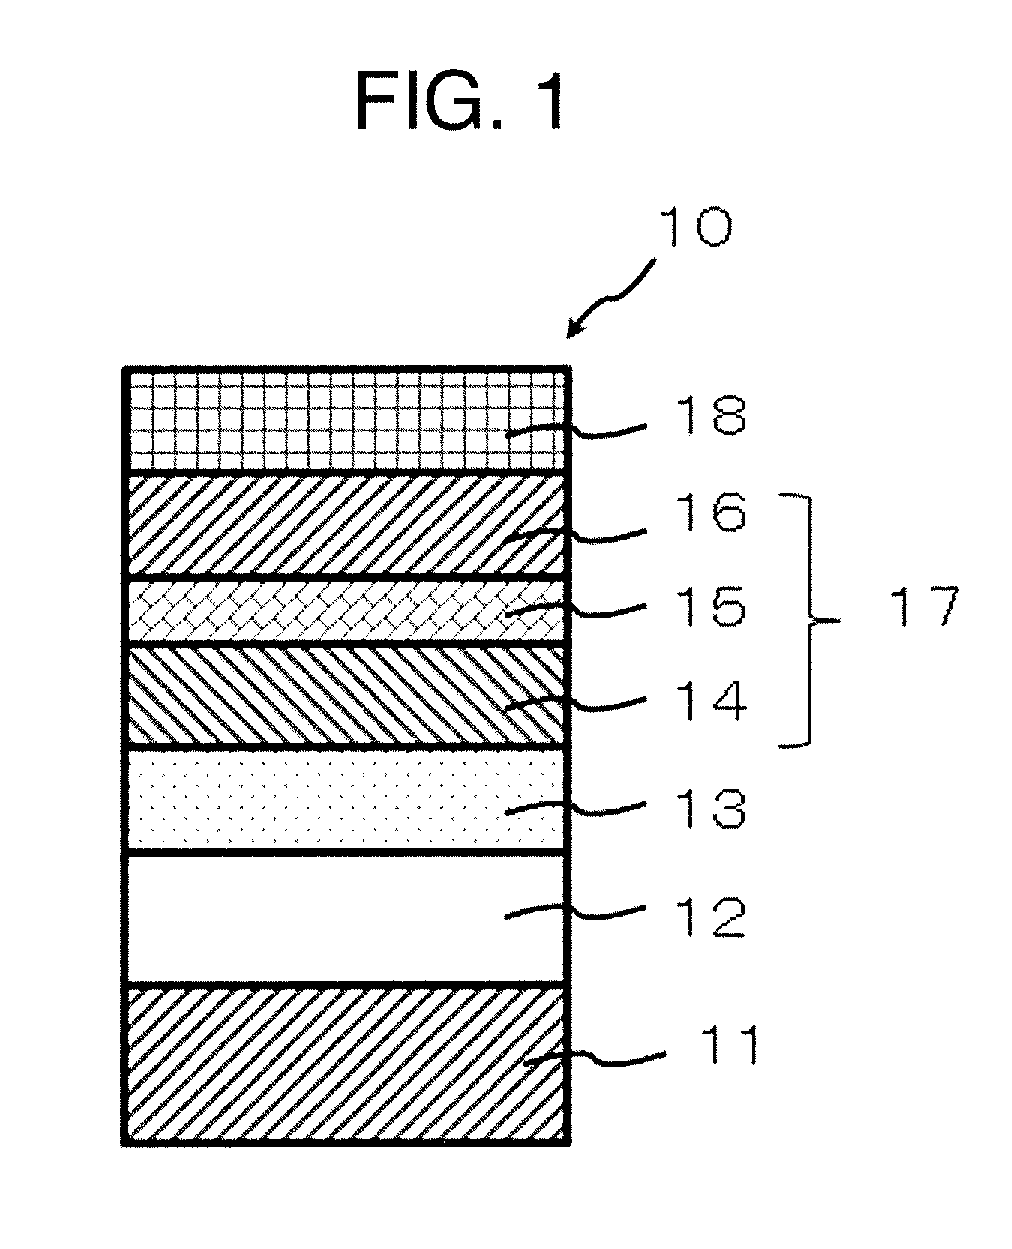 Monocrystalline magneto resistance element, method for producing the same and method for using same